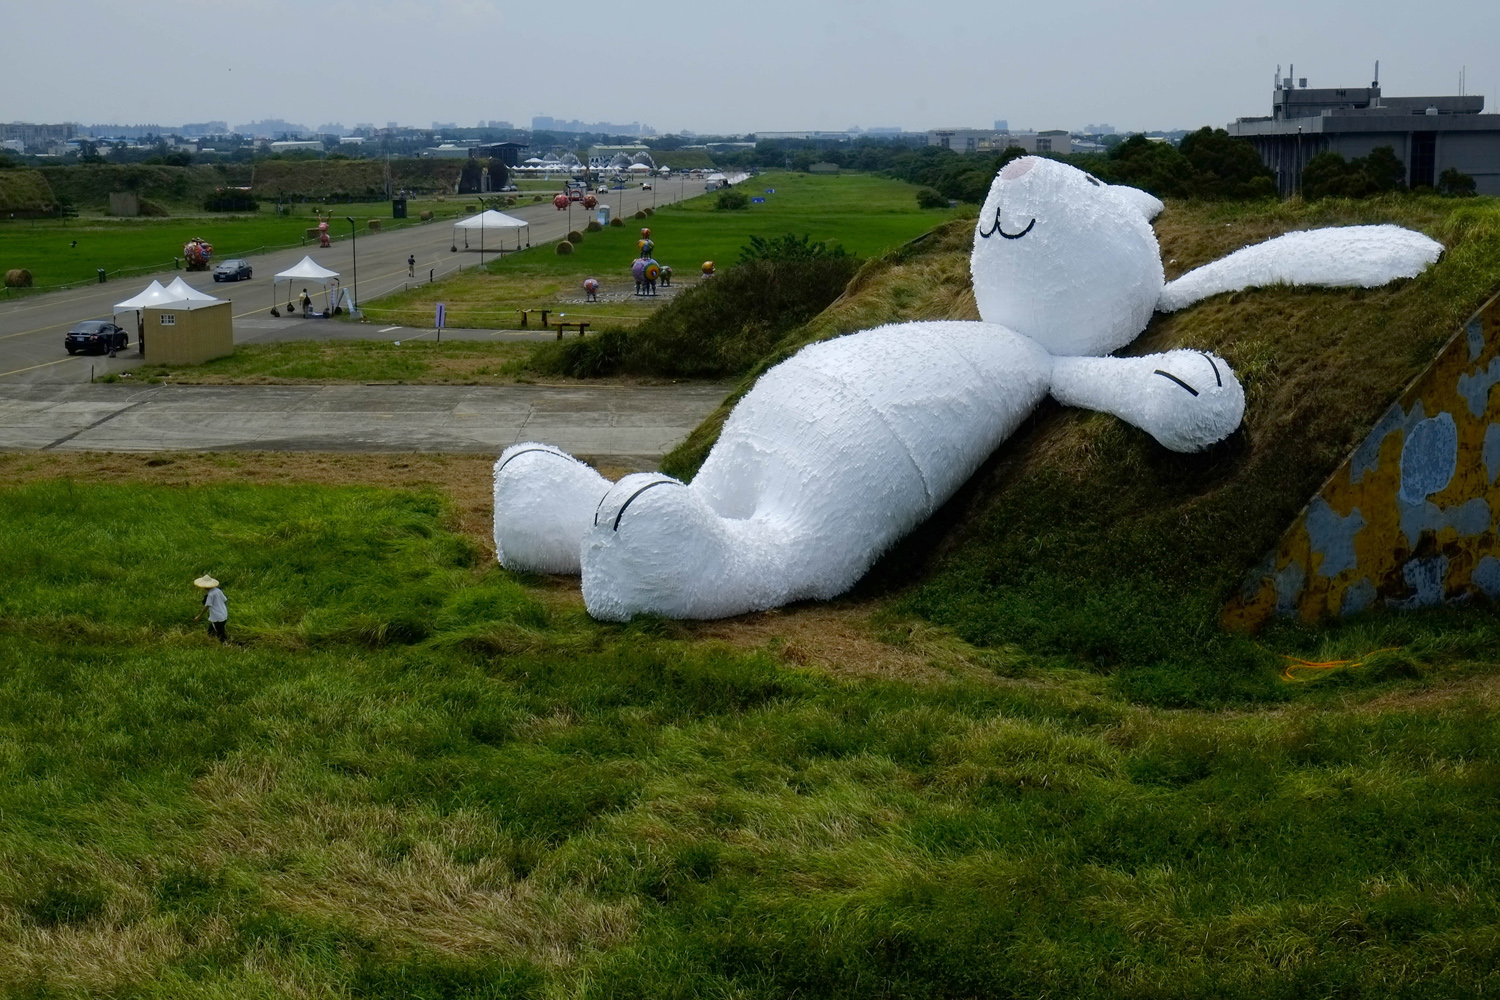 Sept. 2, 2014. Dutch artist Florentijn Hofman's latest creation, a 25 meters (82 feets) white rabbit, leans up against an old aircraft hangar as part of the Taoyuan Land Art Festival in Taoyuan, Taiwan.